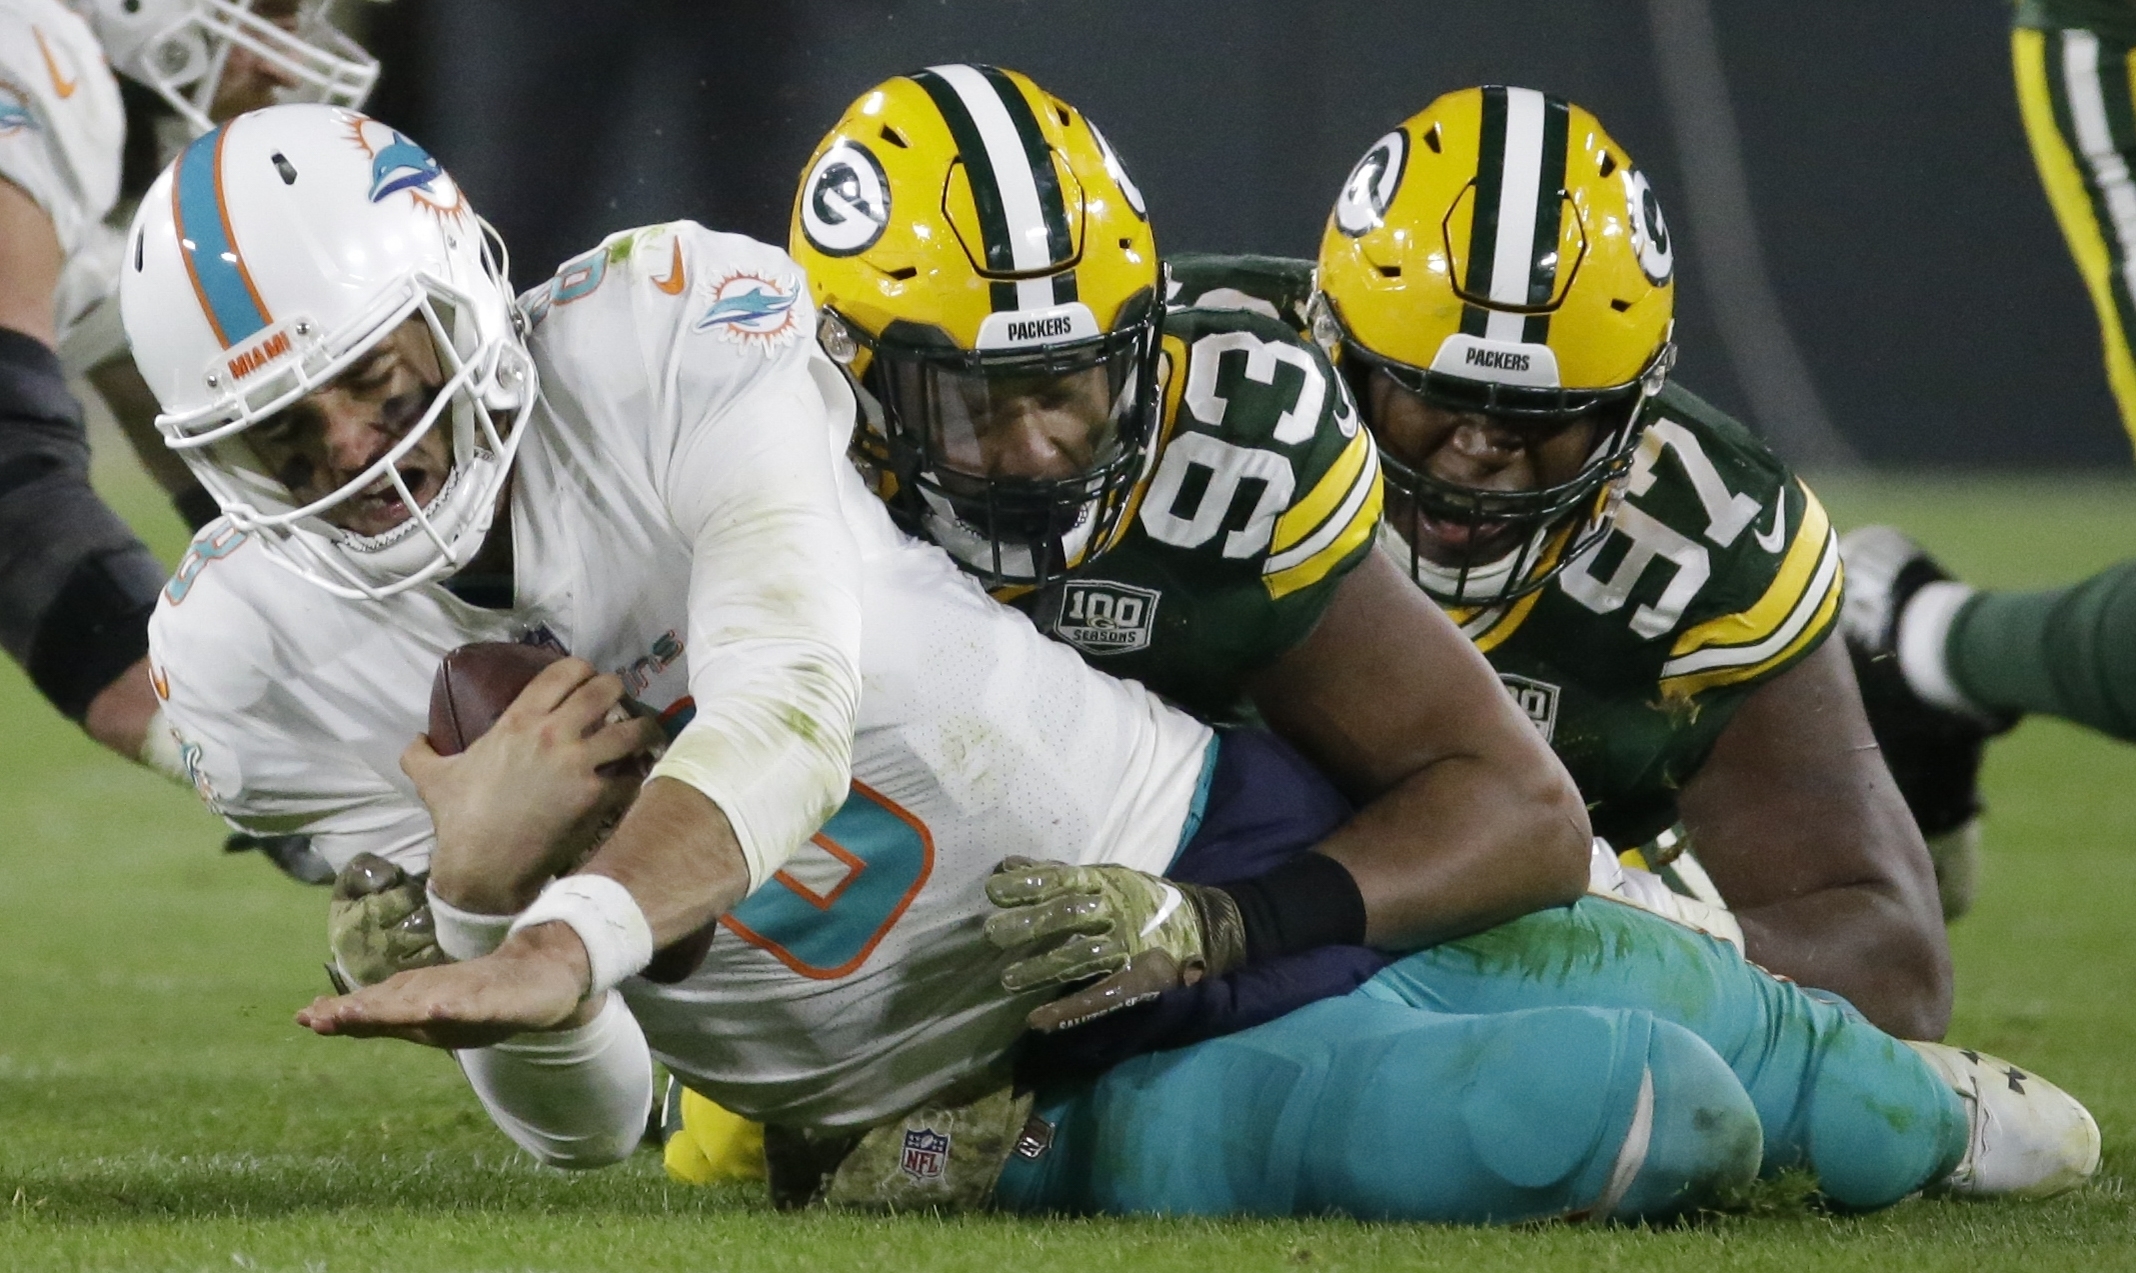 Quick change: Packers move on after win, prep for Seattle